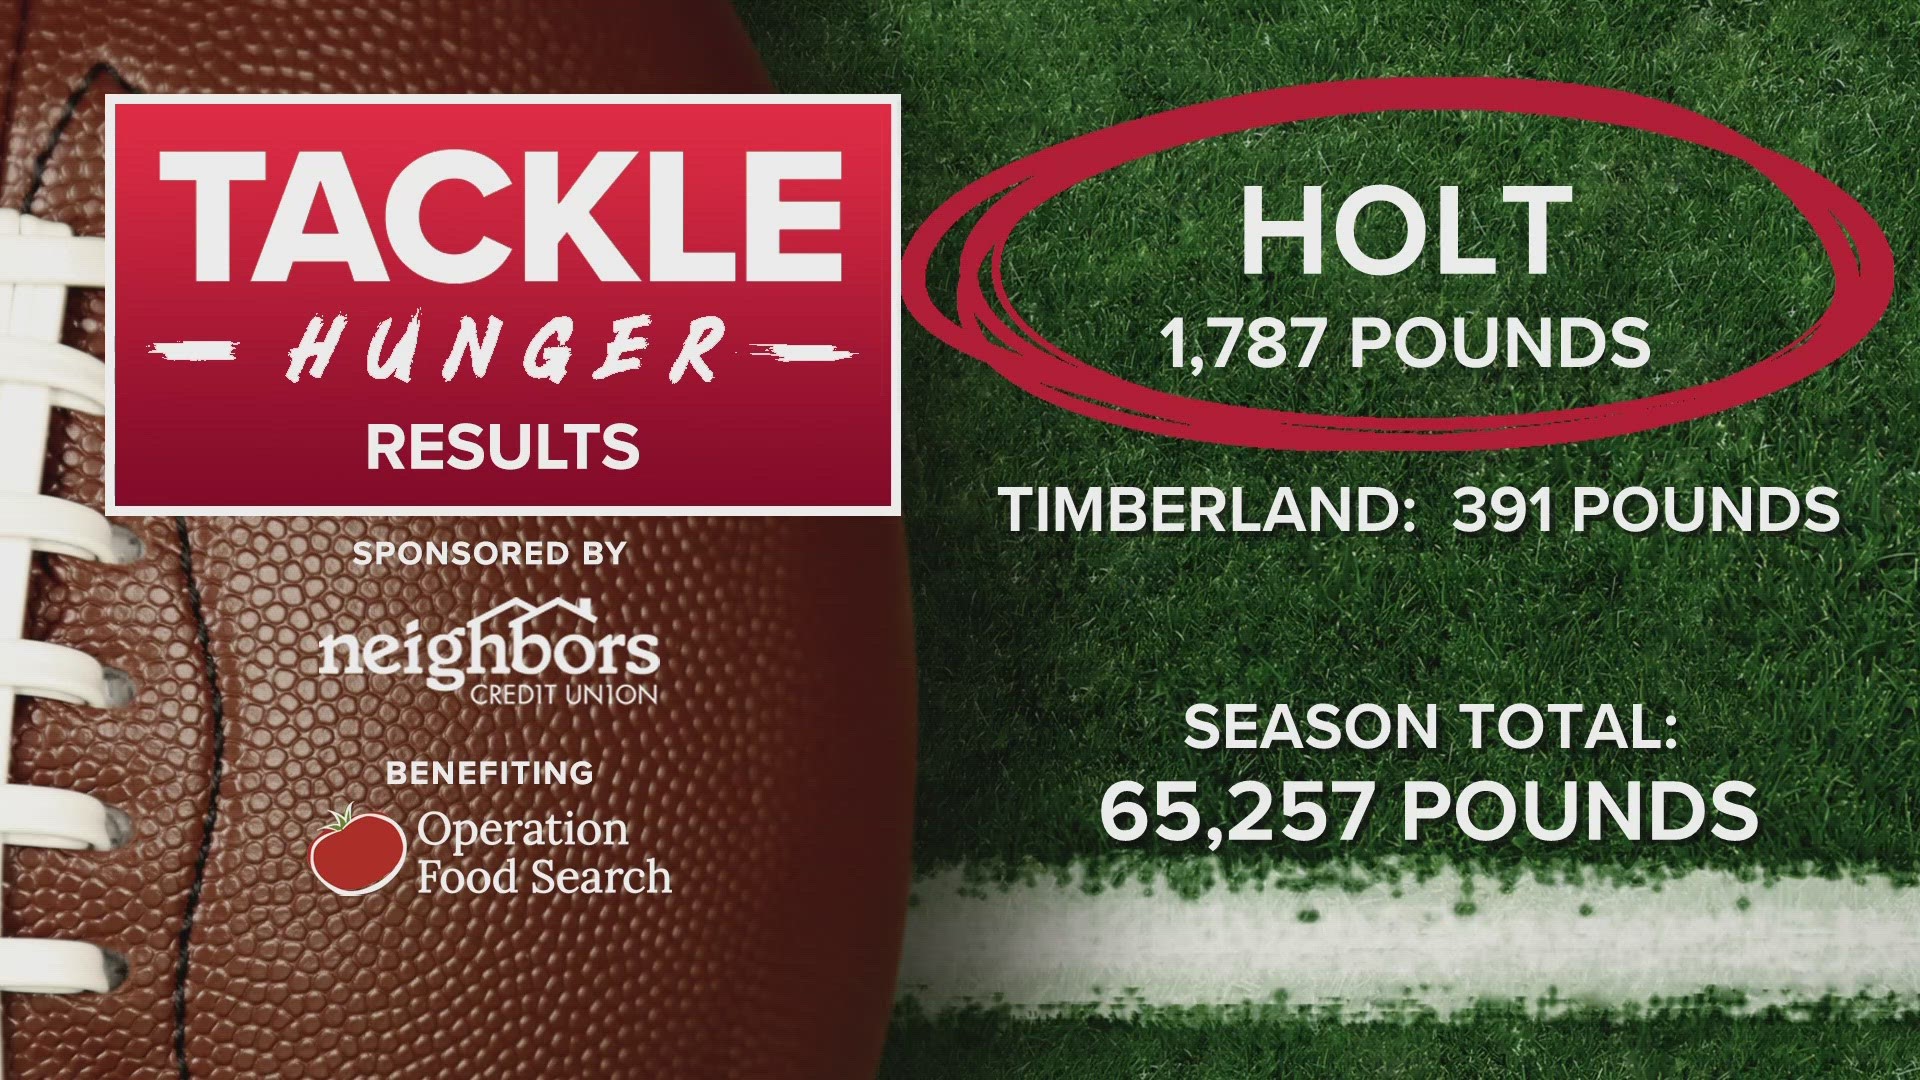 Timberland and Holt competed on the field and off. They teams 'tackled hunger' and Holt High School collected 1,700 pounds of food.